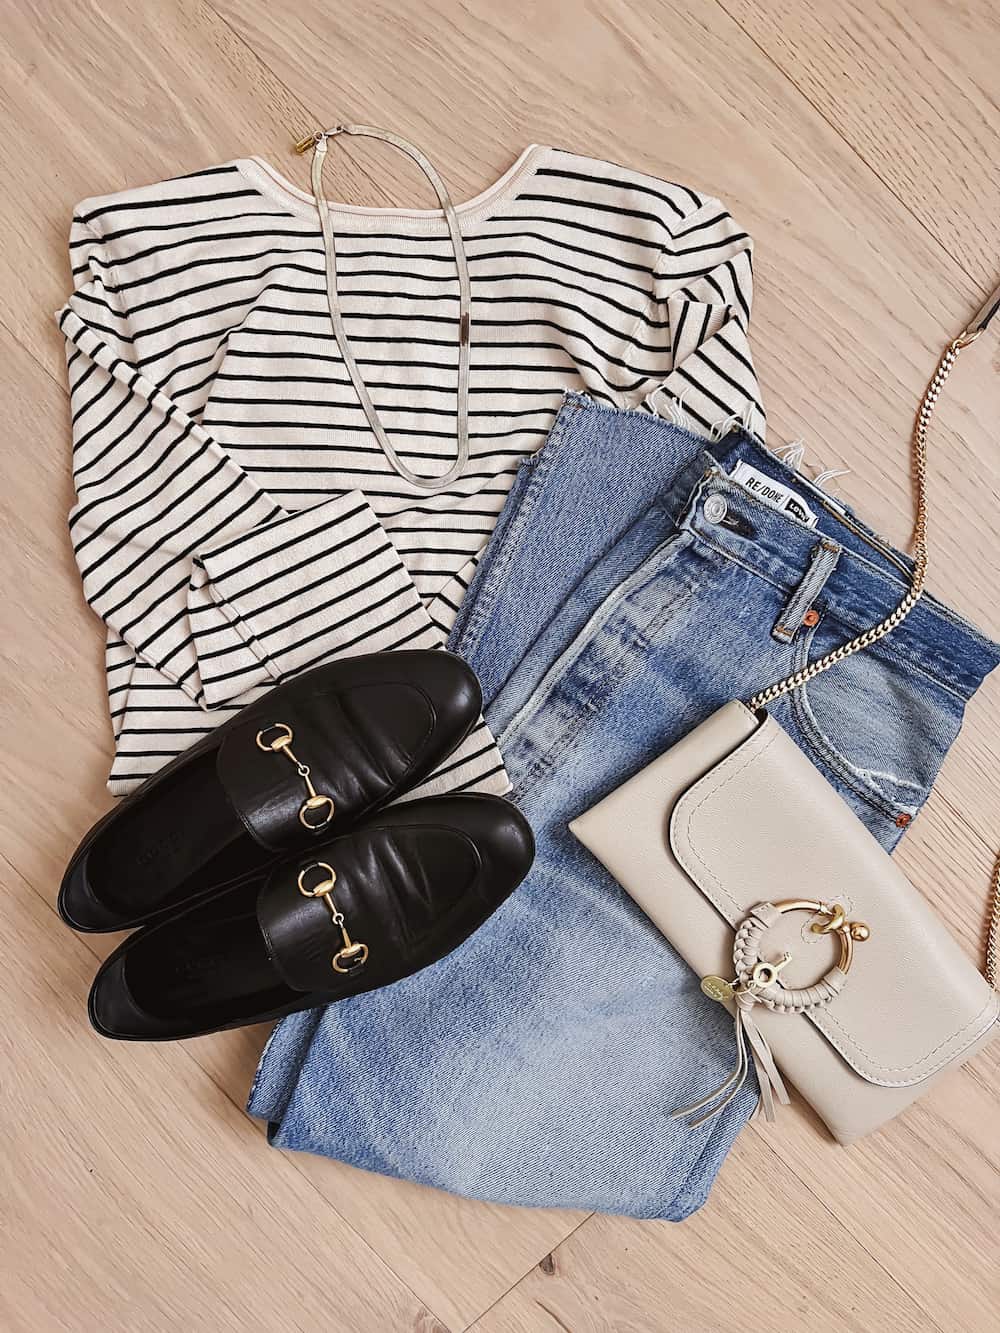 image of an outfit flat lay with blue jeans, black shoes, a striped top and a cream purse